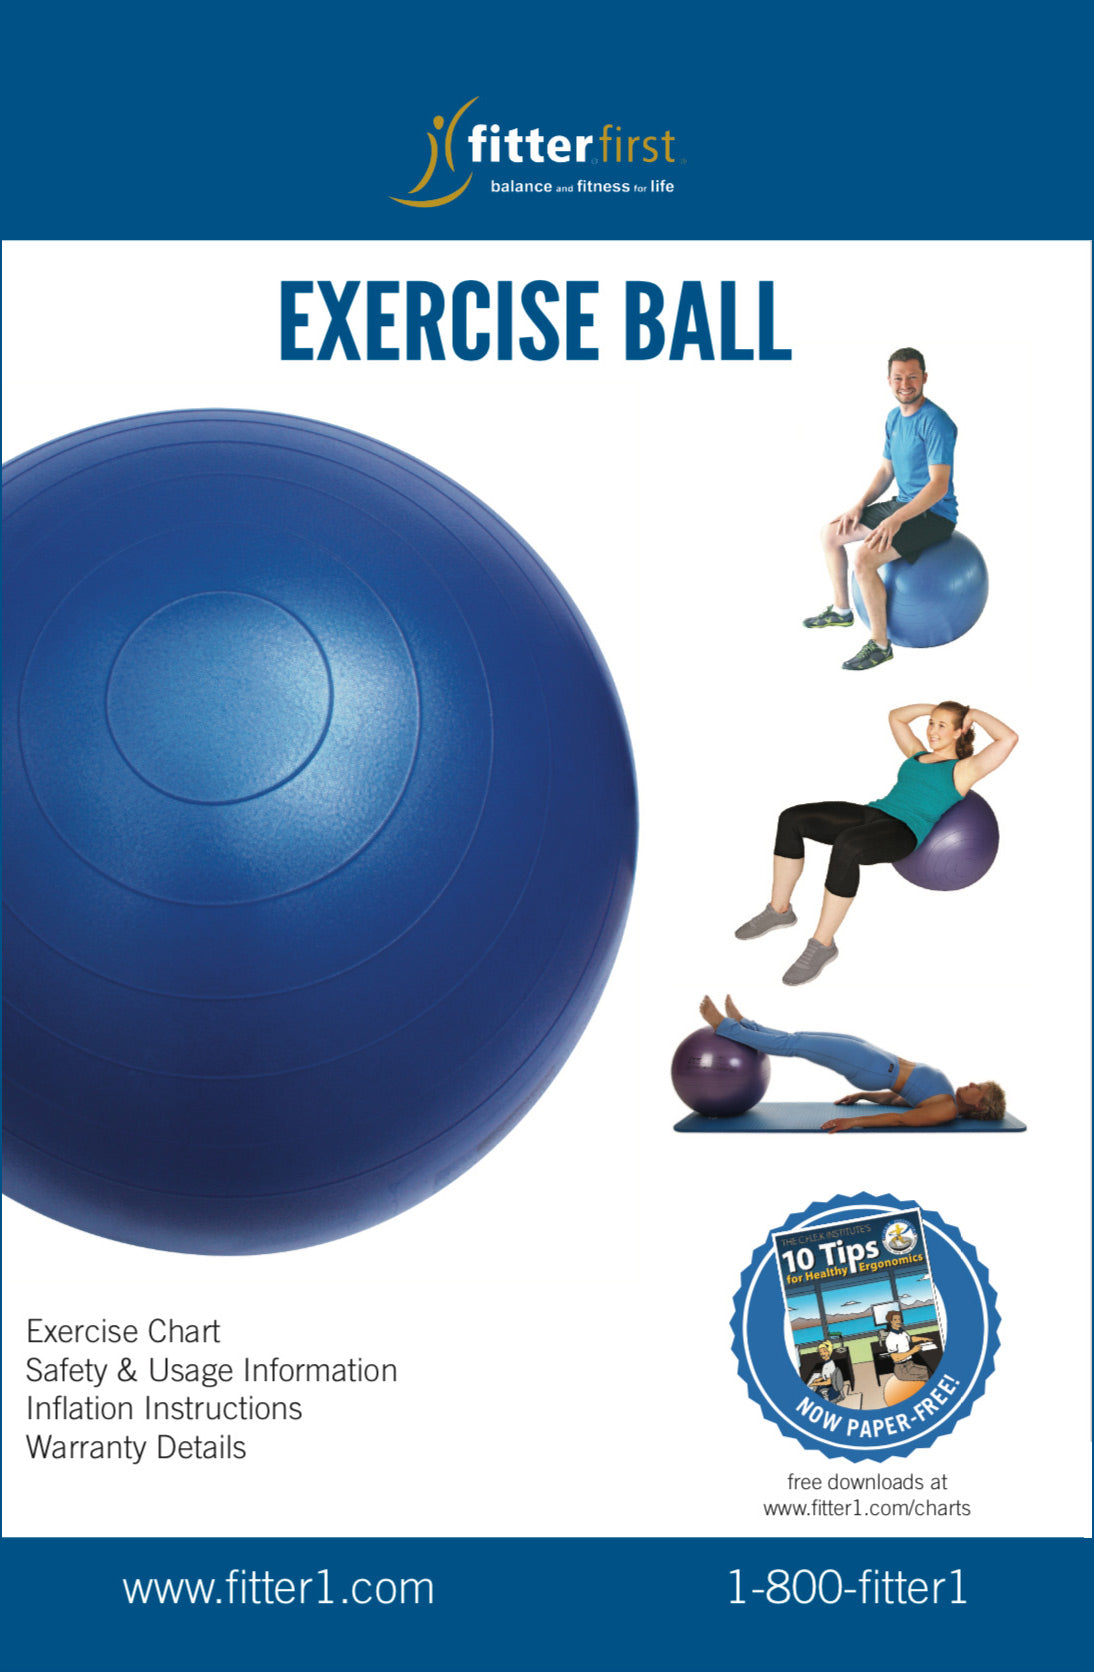 Fitterfirst Exercise Ball Exercise Chart - USA Fitterfirst